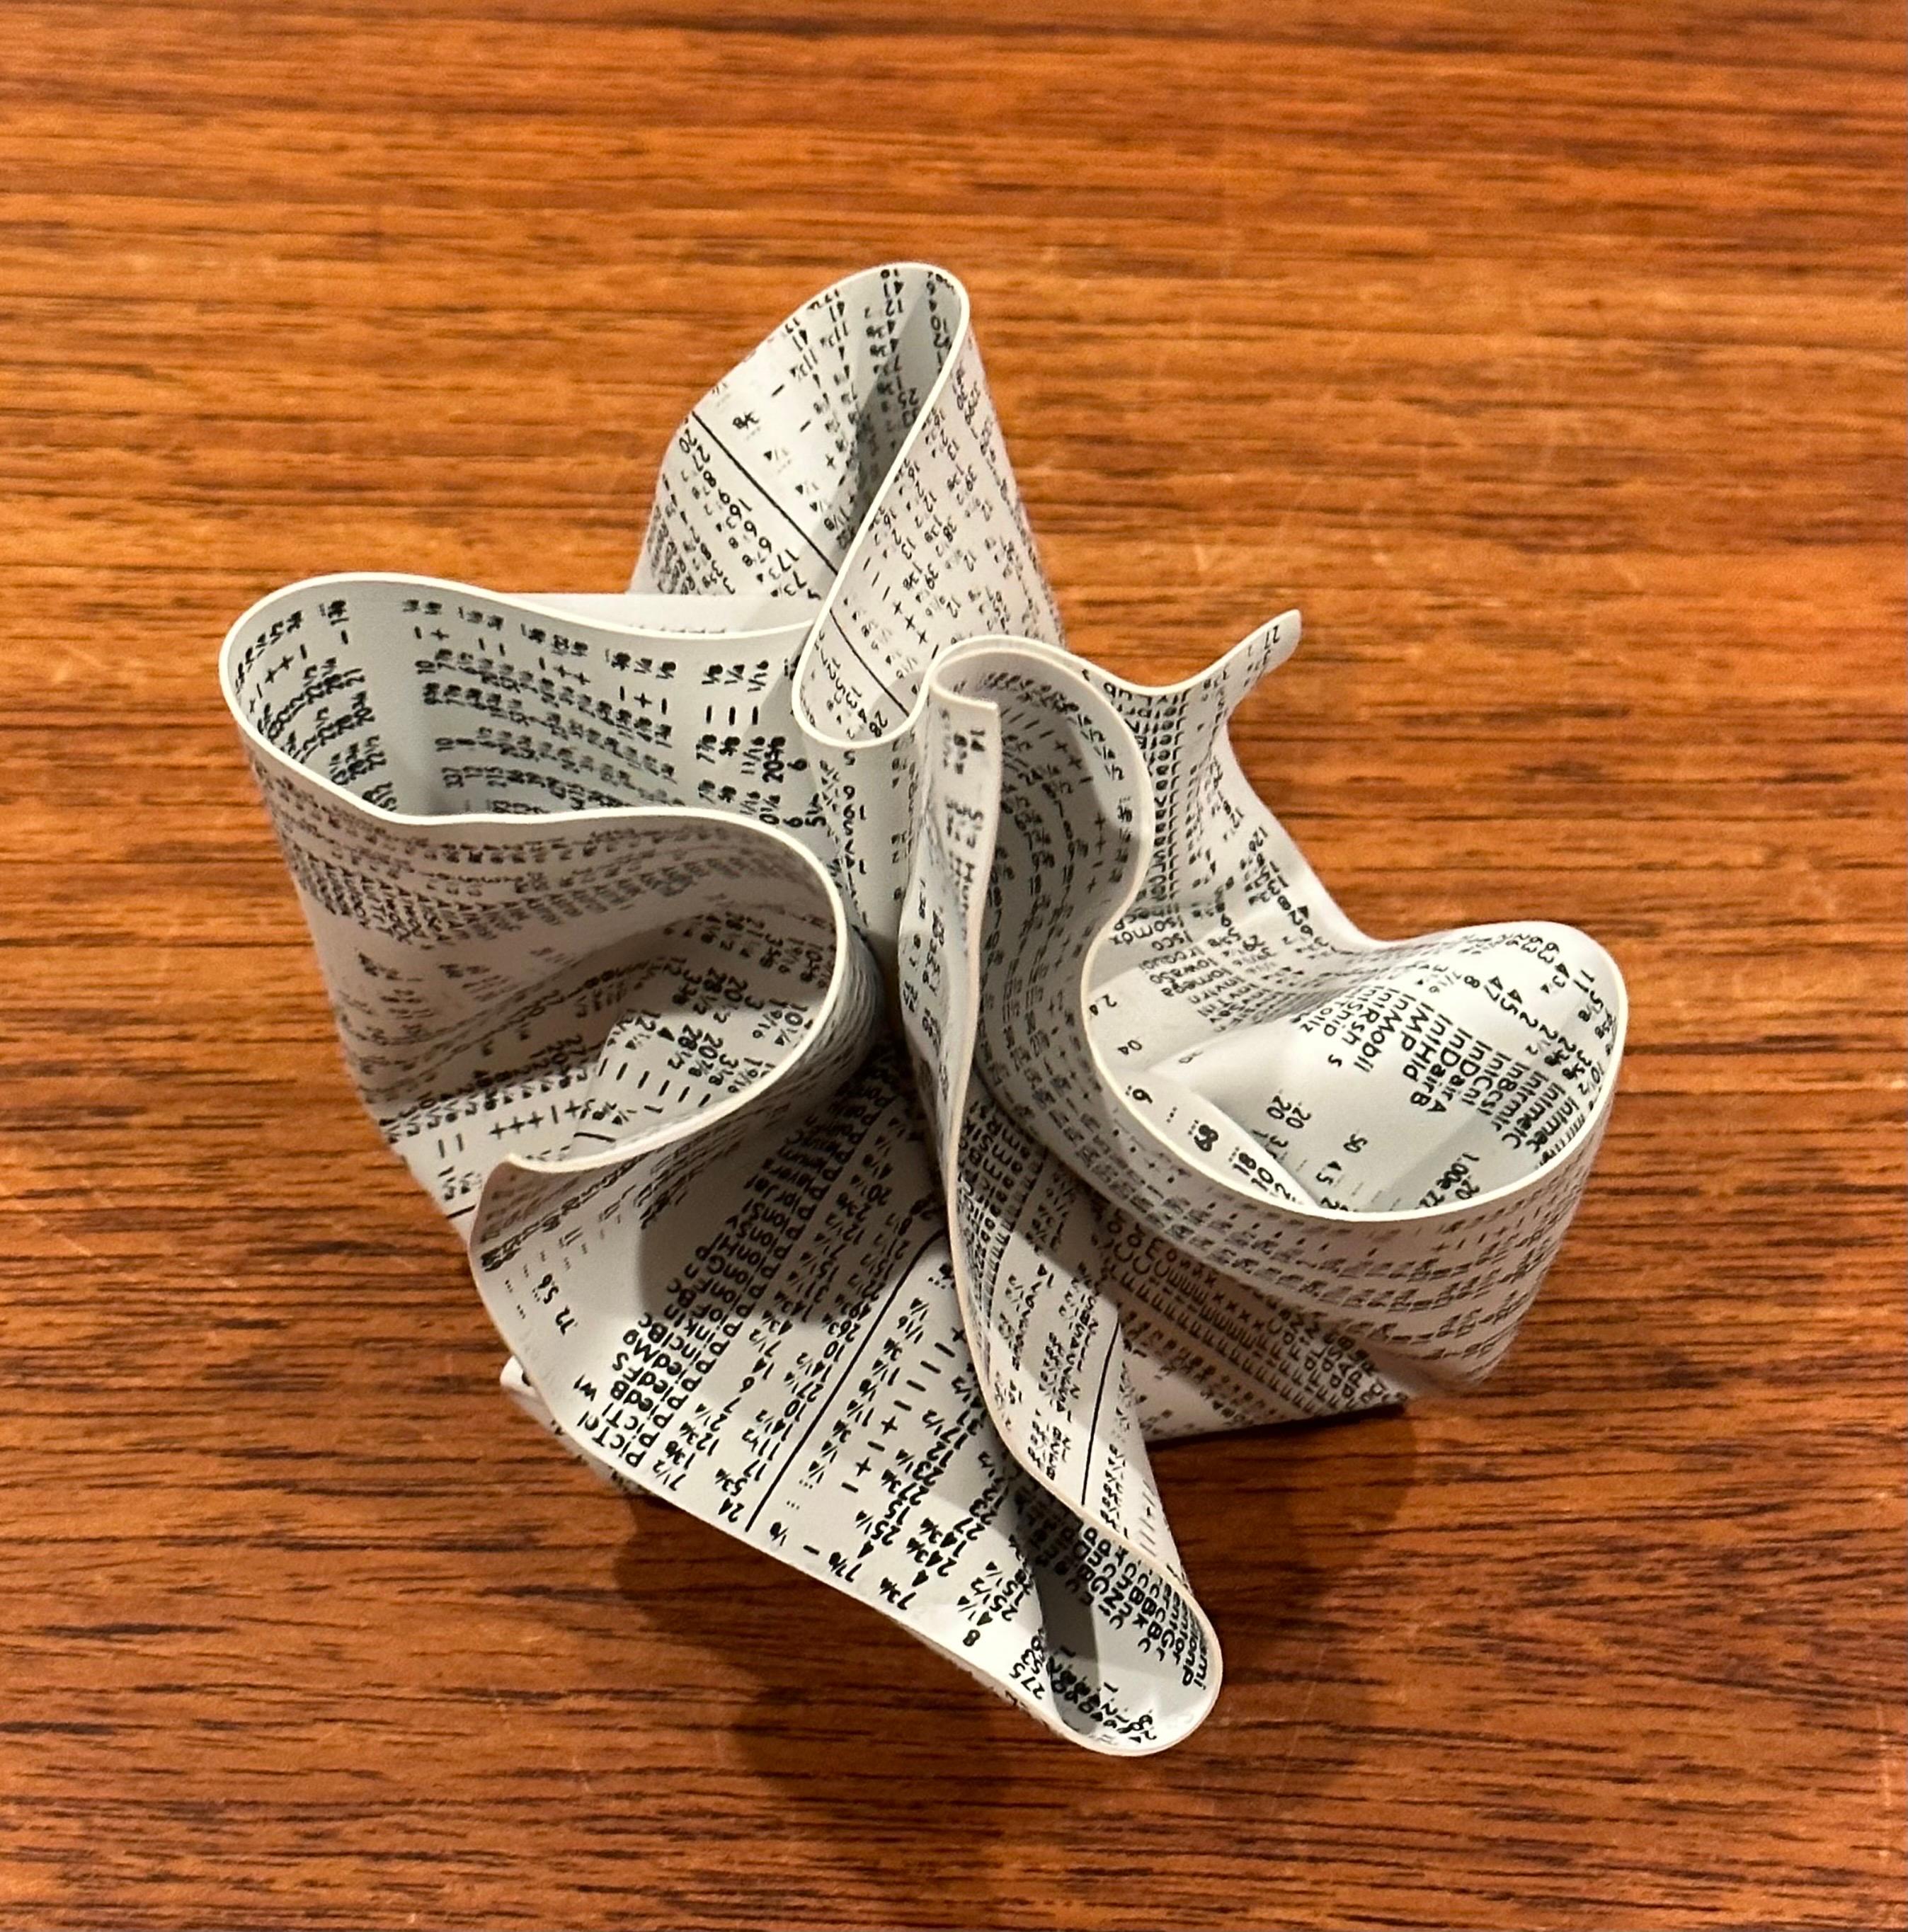 Mid-Century Modern Crumpled WSJ / Newspaper Paperweight by Designer Tibor Kalman for M & Co. / MOMA For Sale